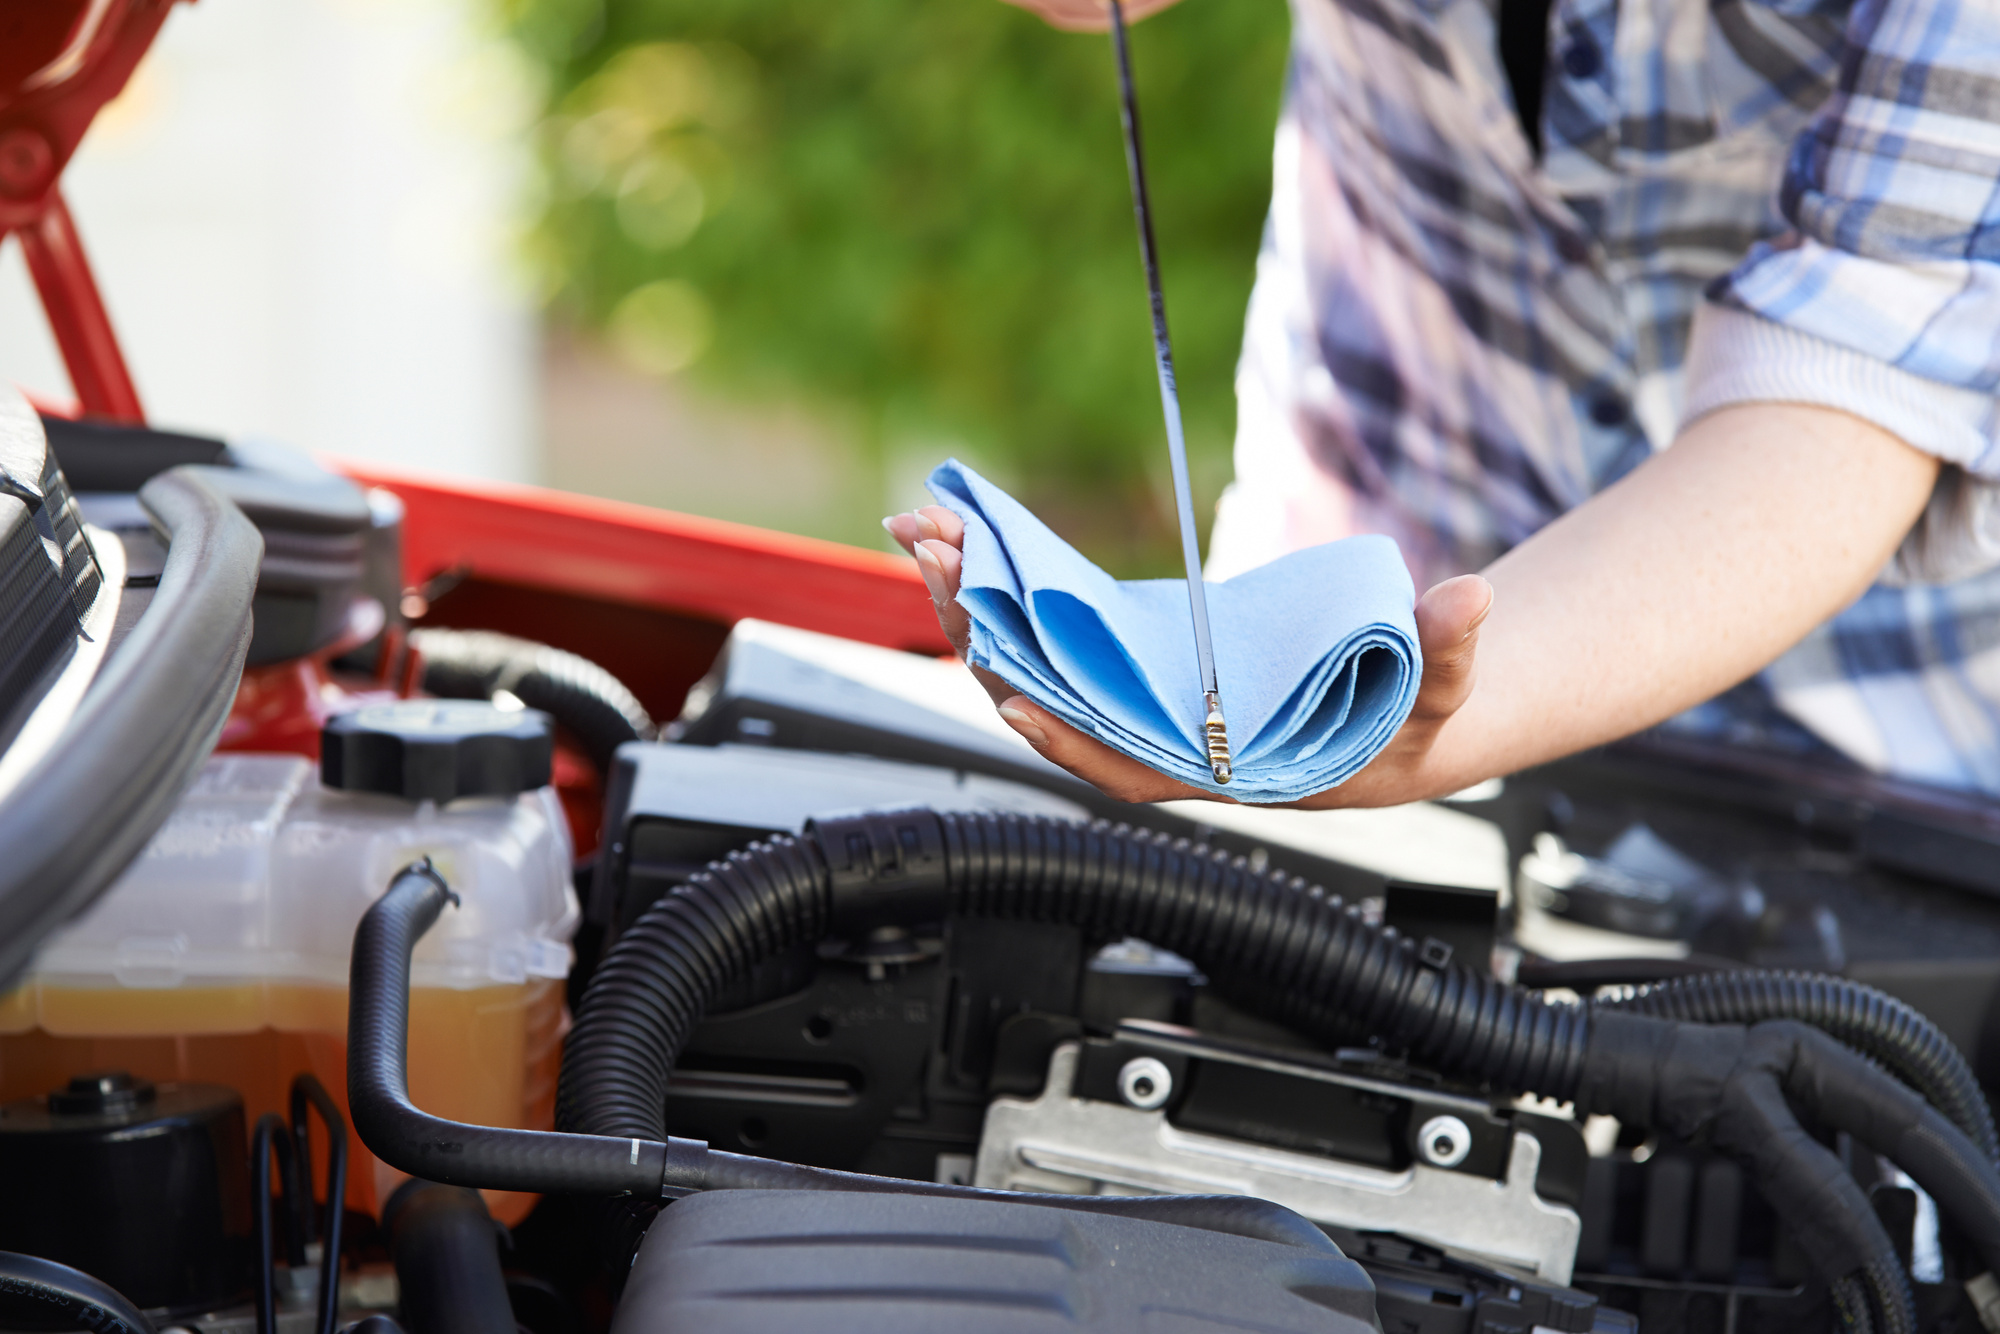 If you own a car, then you need to know how to properly take care of it. Let us help you out with these 5 vehicle maintenance tips you need to know.